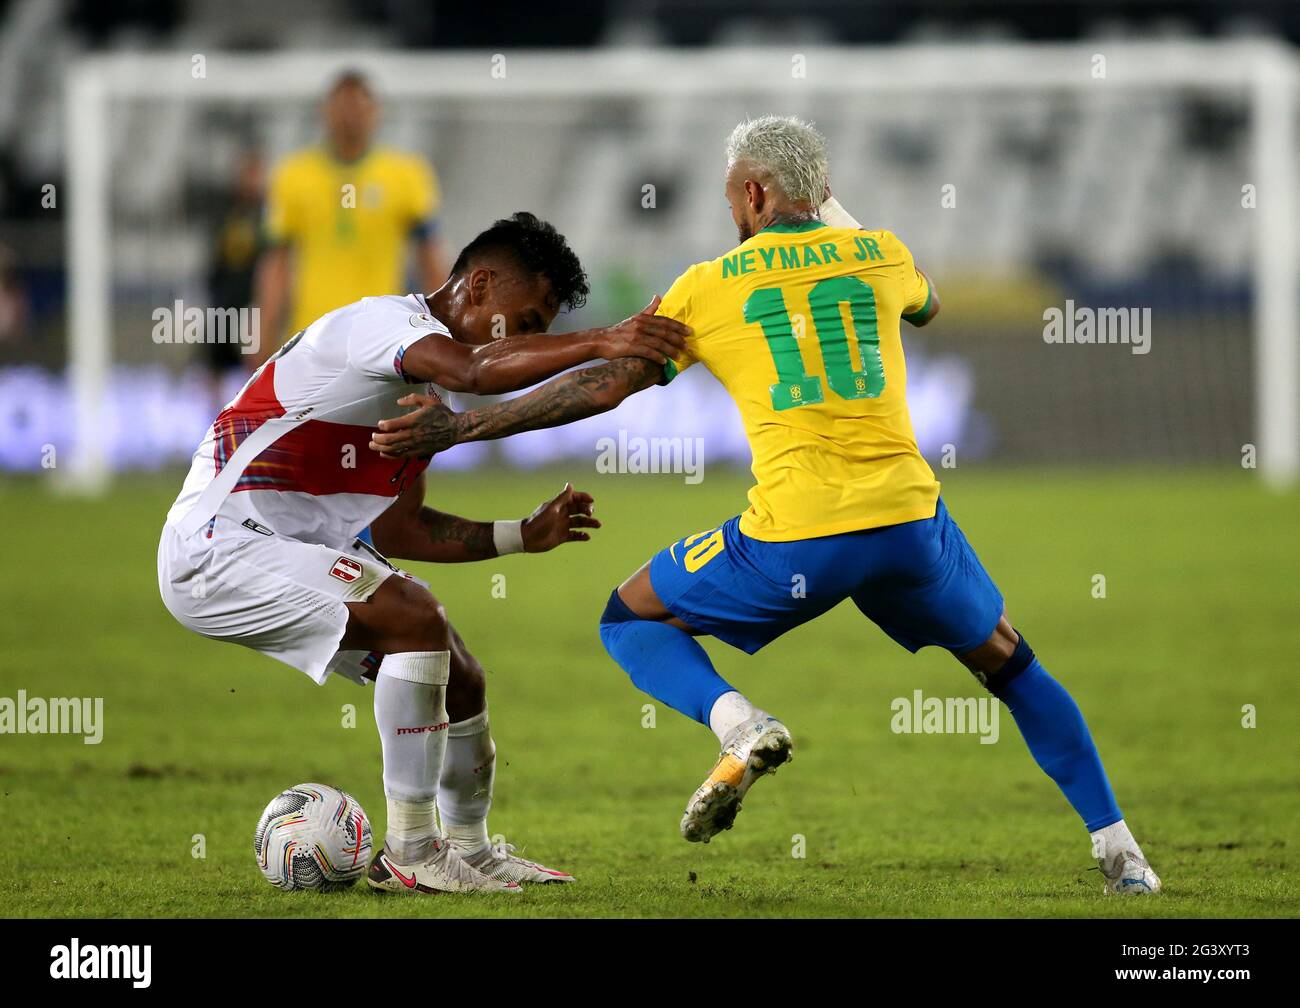 RIO DE JANEIRO, BRAZIL - JUNE 17: : Neymar of Brazil competes for the ball with Renato Tapia of Peru ,during the match between Brazil and Peru as part of Conmebol Copa America Brazil 2021 at Estadio Olímpico Nilton Santos on June 17, 2021 in Rio de Janeiro, Brazil. (Photo by MB Media) Stock Photo